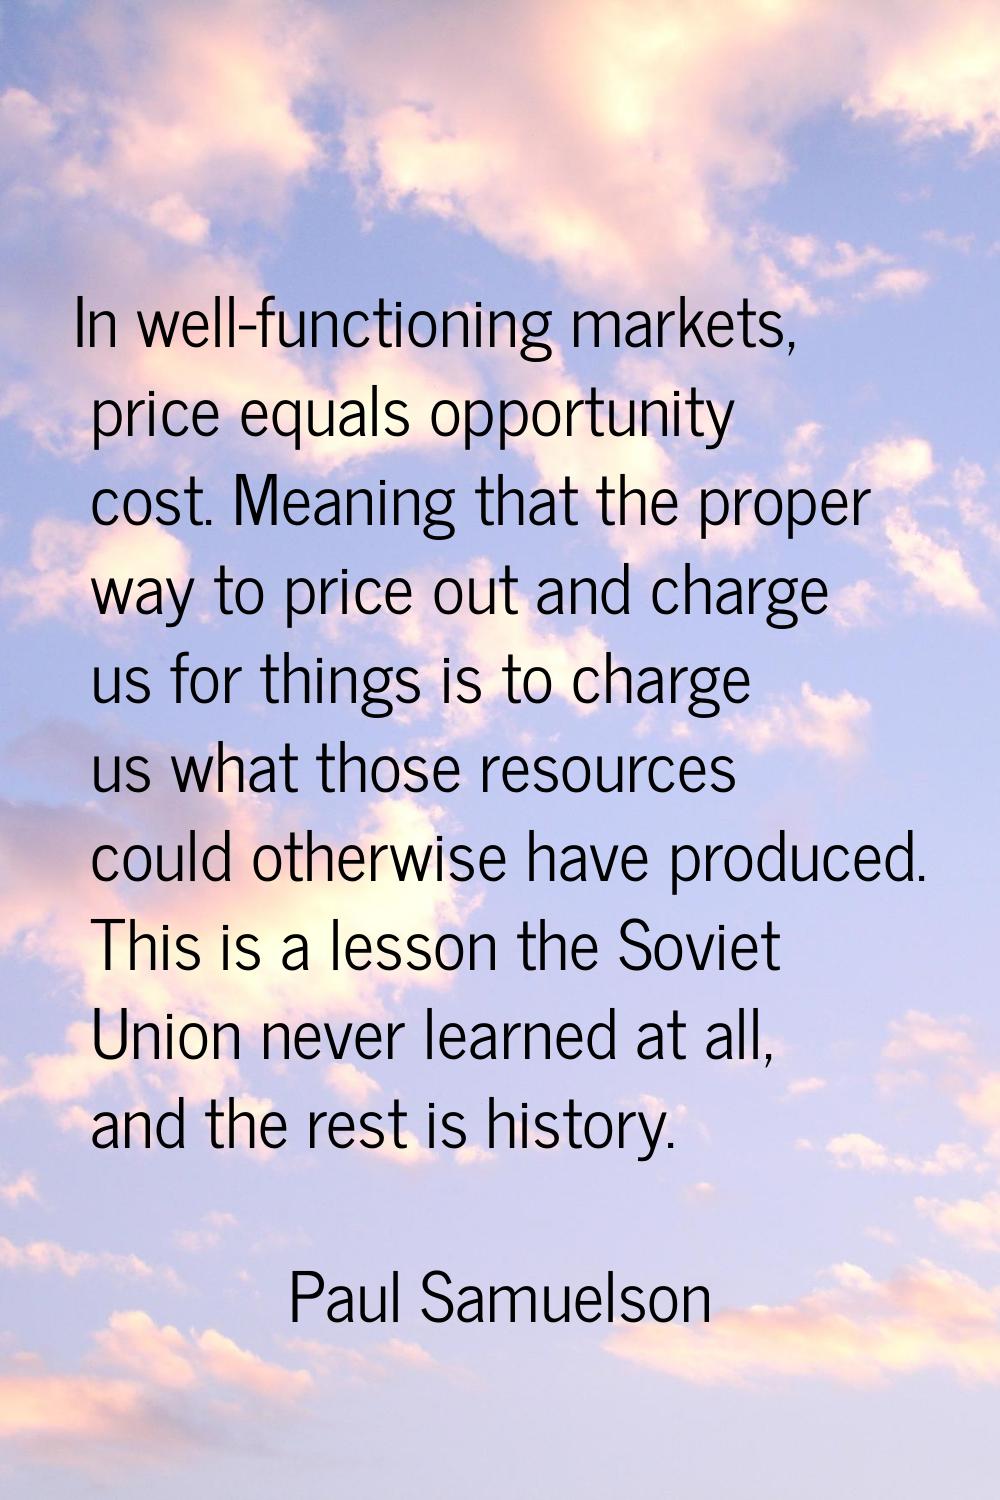 In well-functioning markets, price equals opportunity cost. Meaning that the proper way to price ou